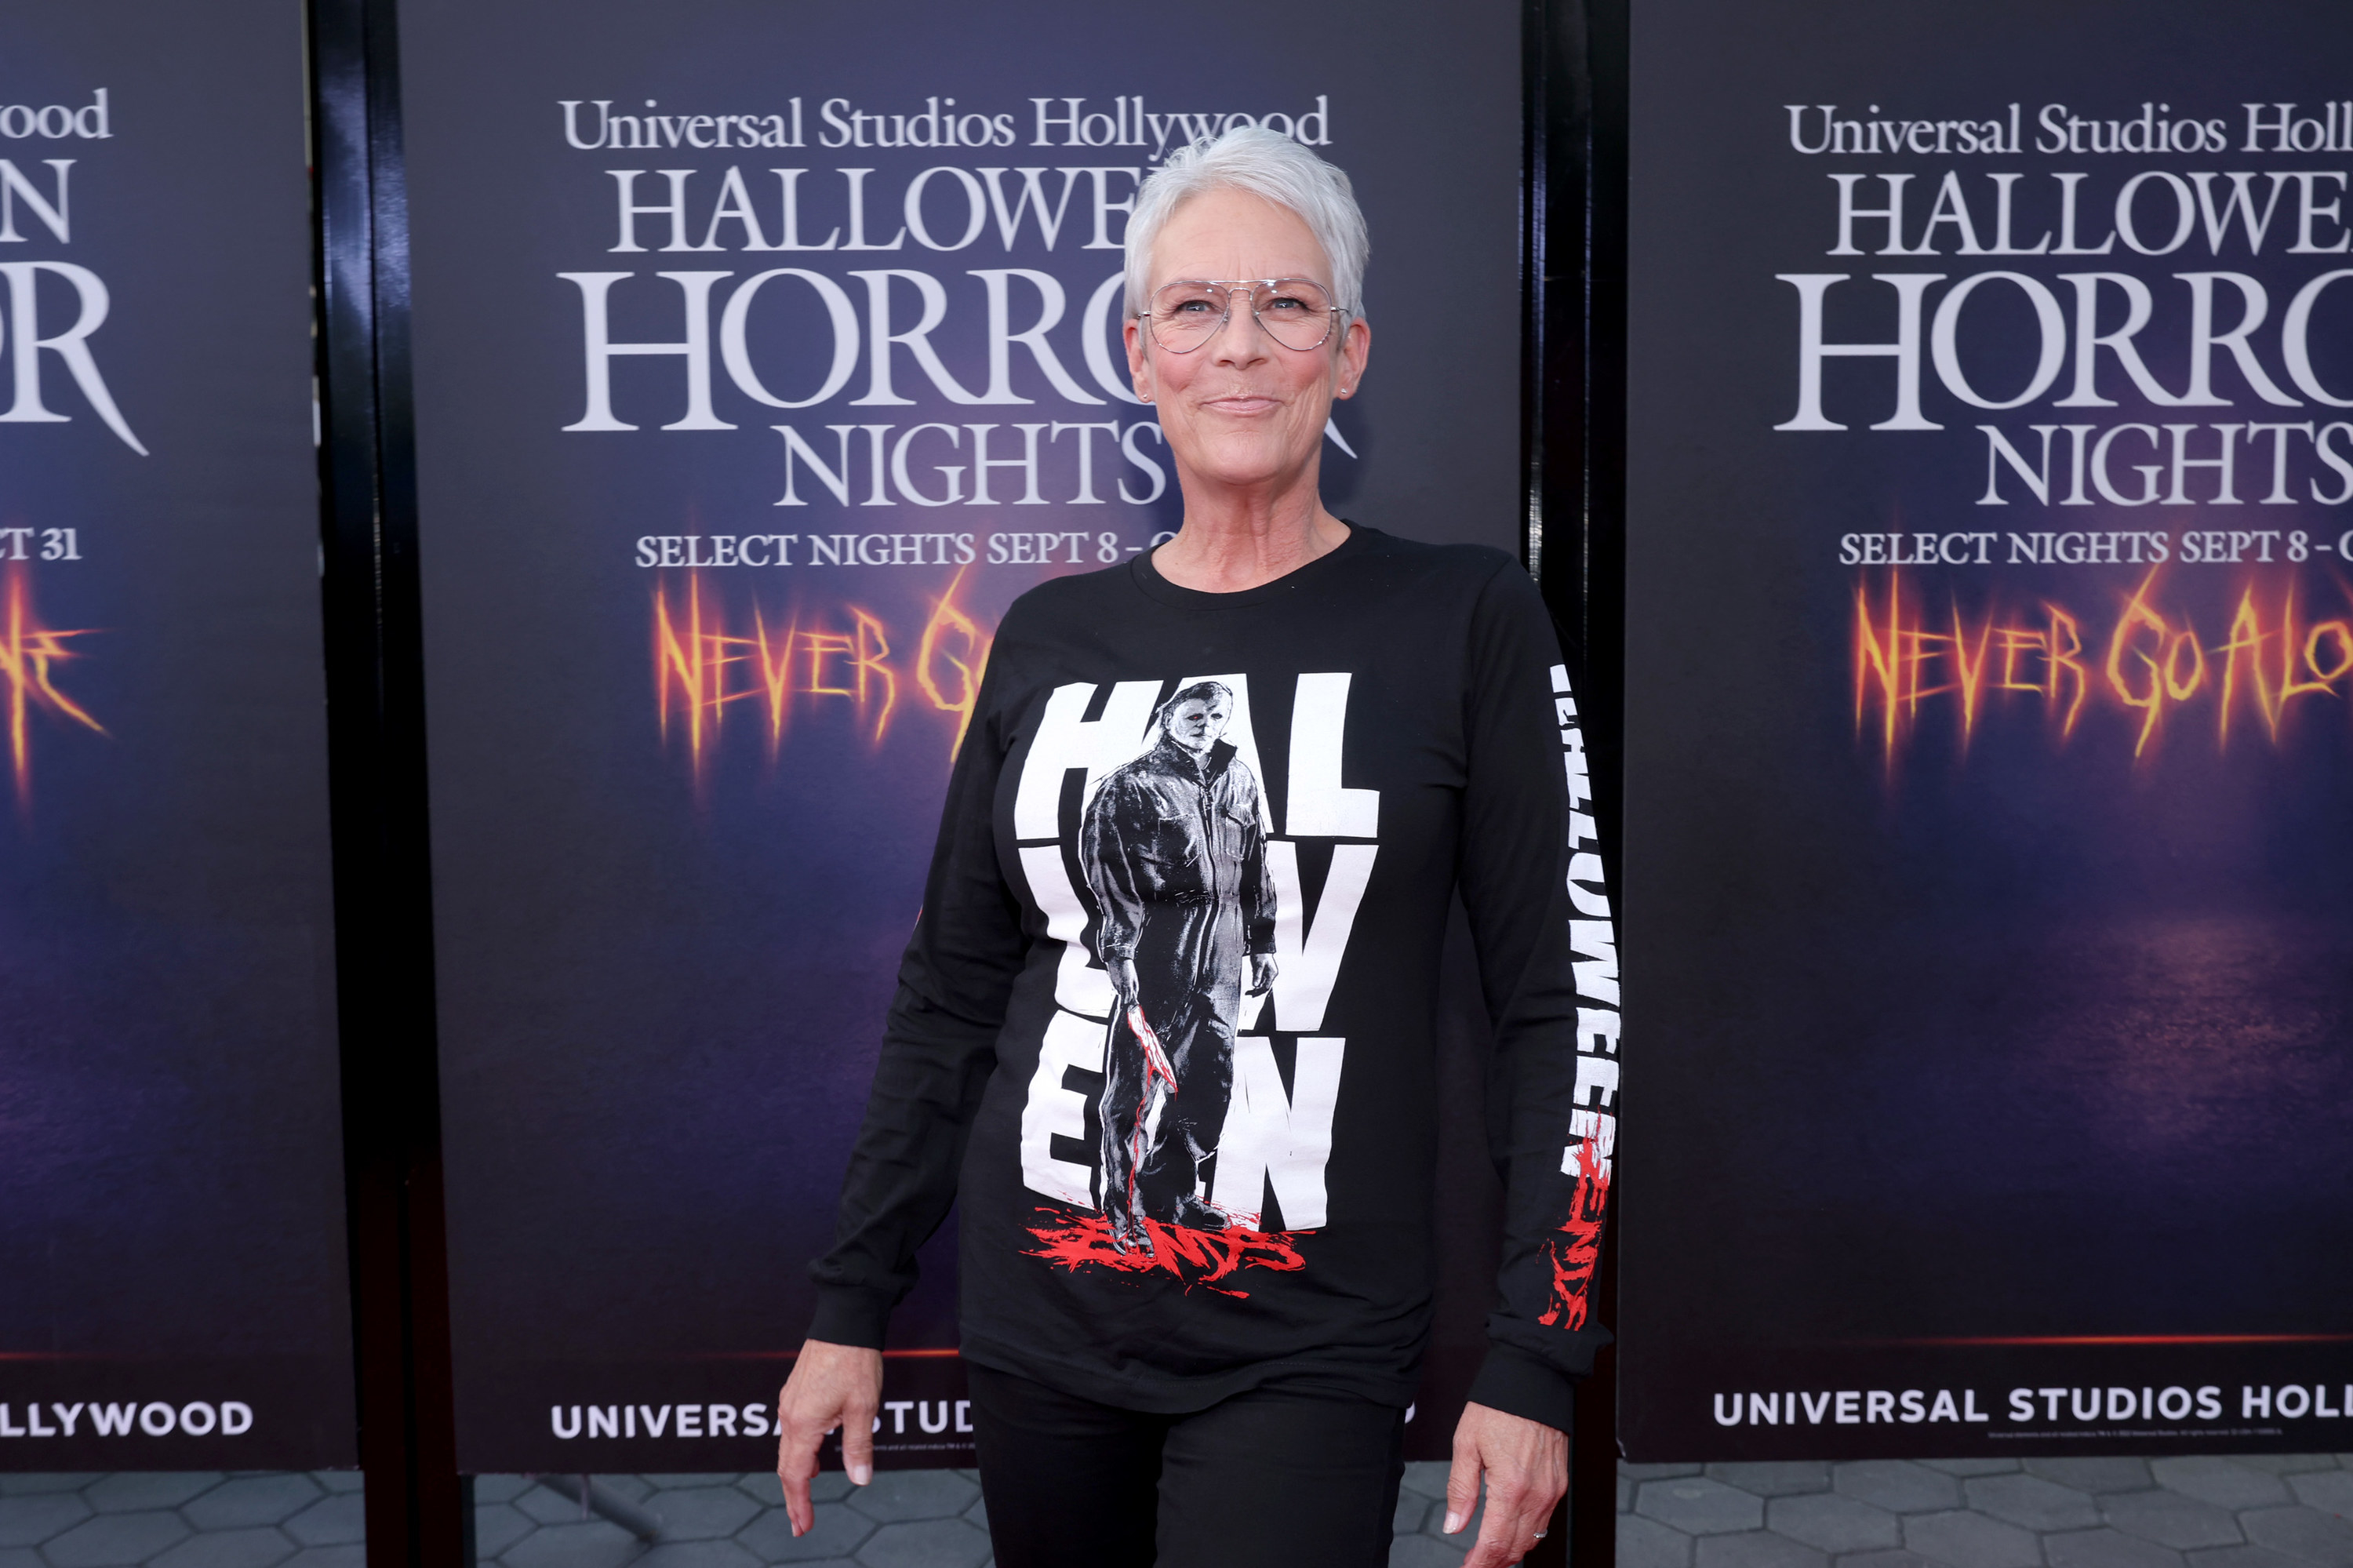 Jamie Lee Curtis wearing a &quot;Halloween&quot; long sleeved t-shirt with Michael Myers on it, smiling in front of a poster for Universal Studios Hollywood Halloween Horror Nights